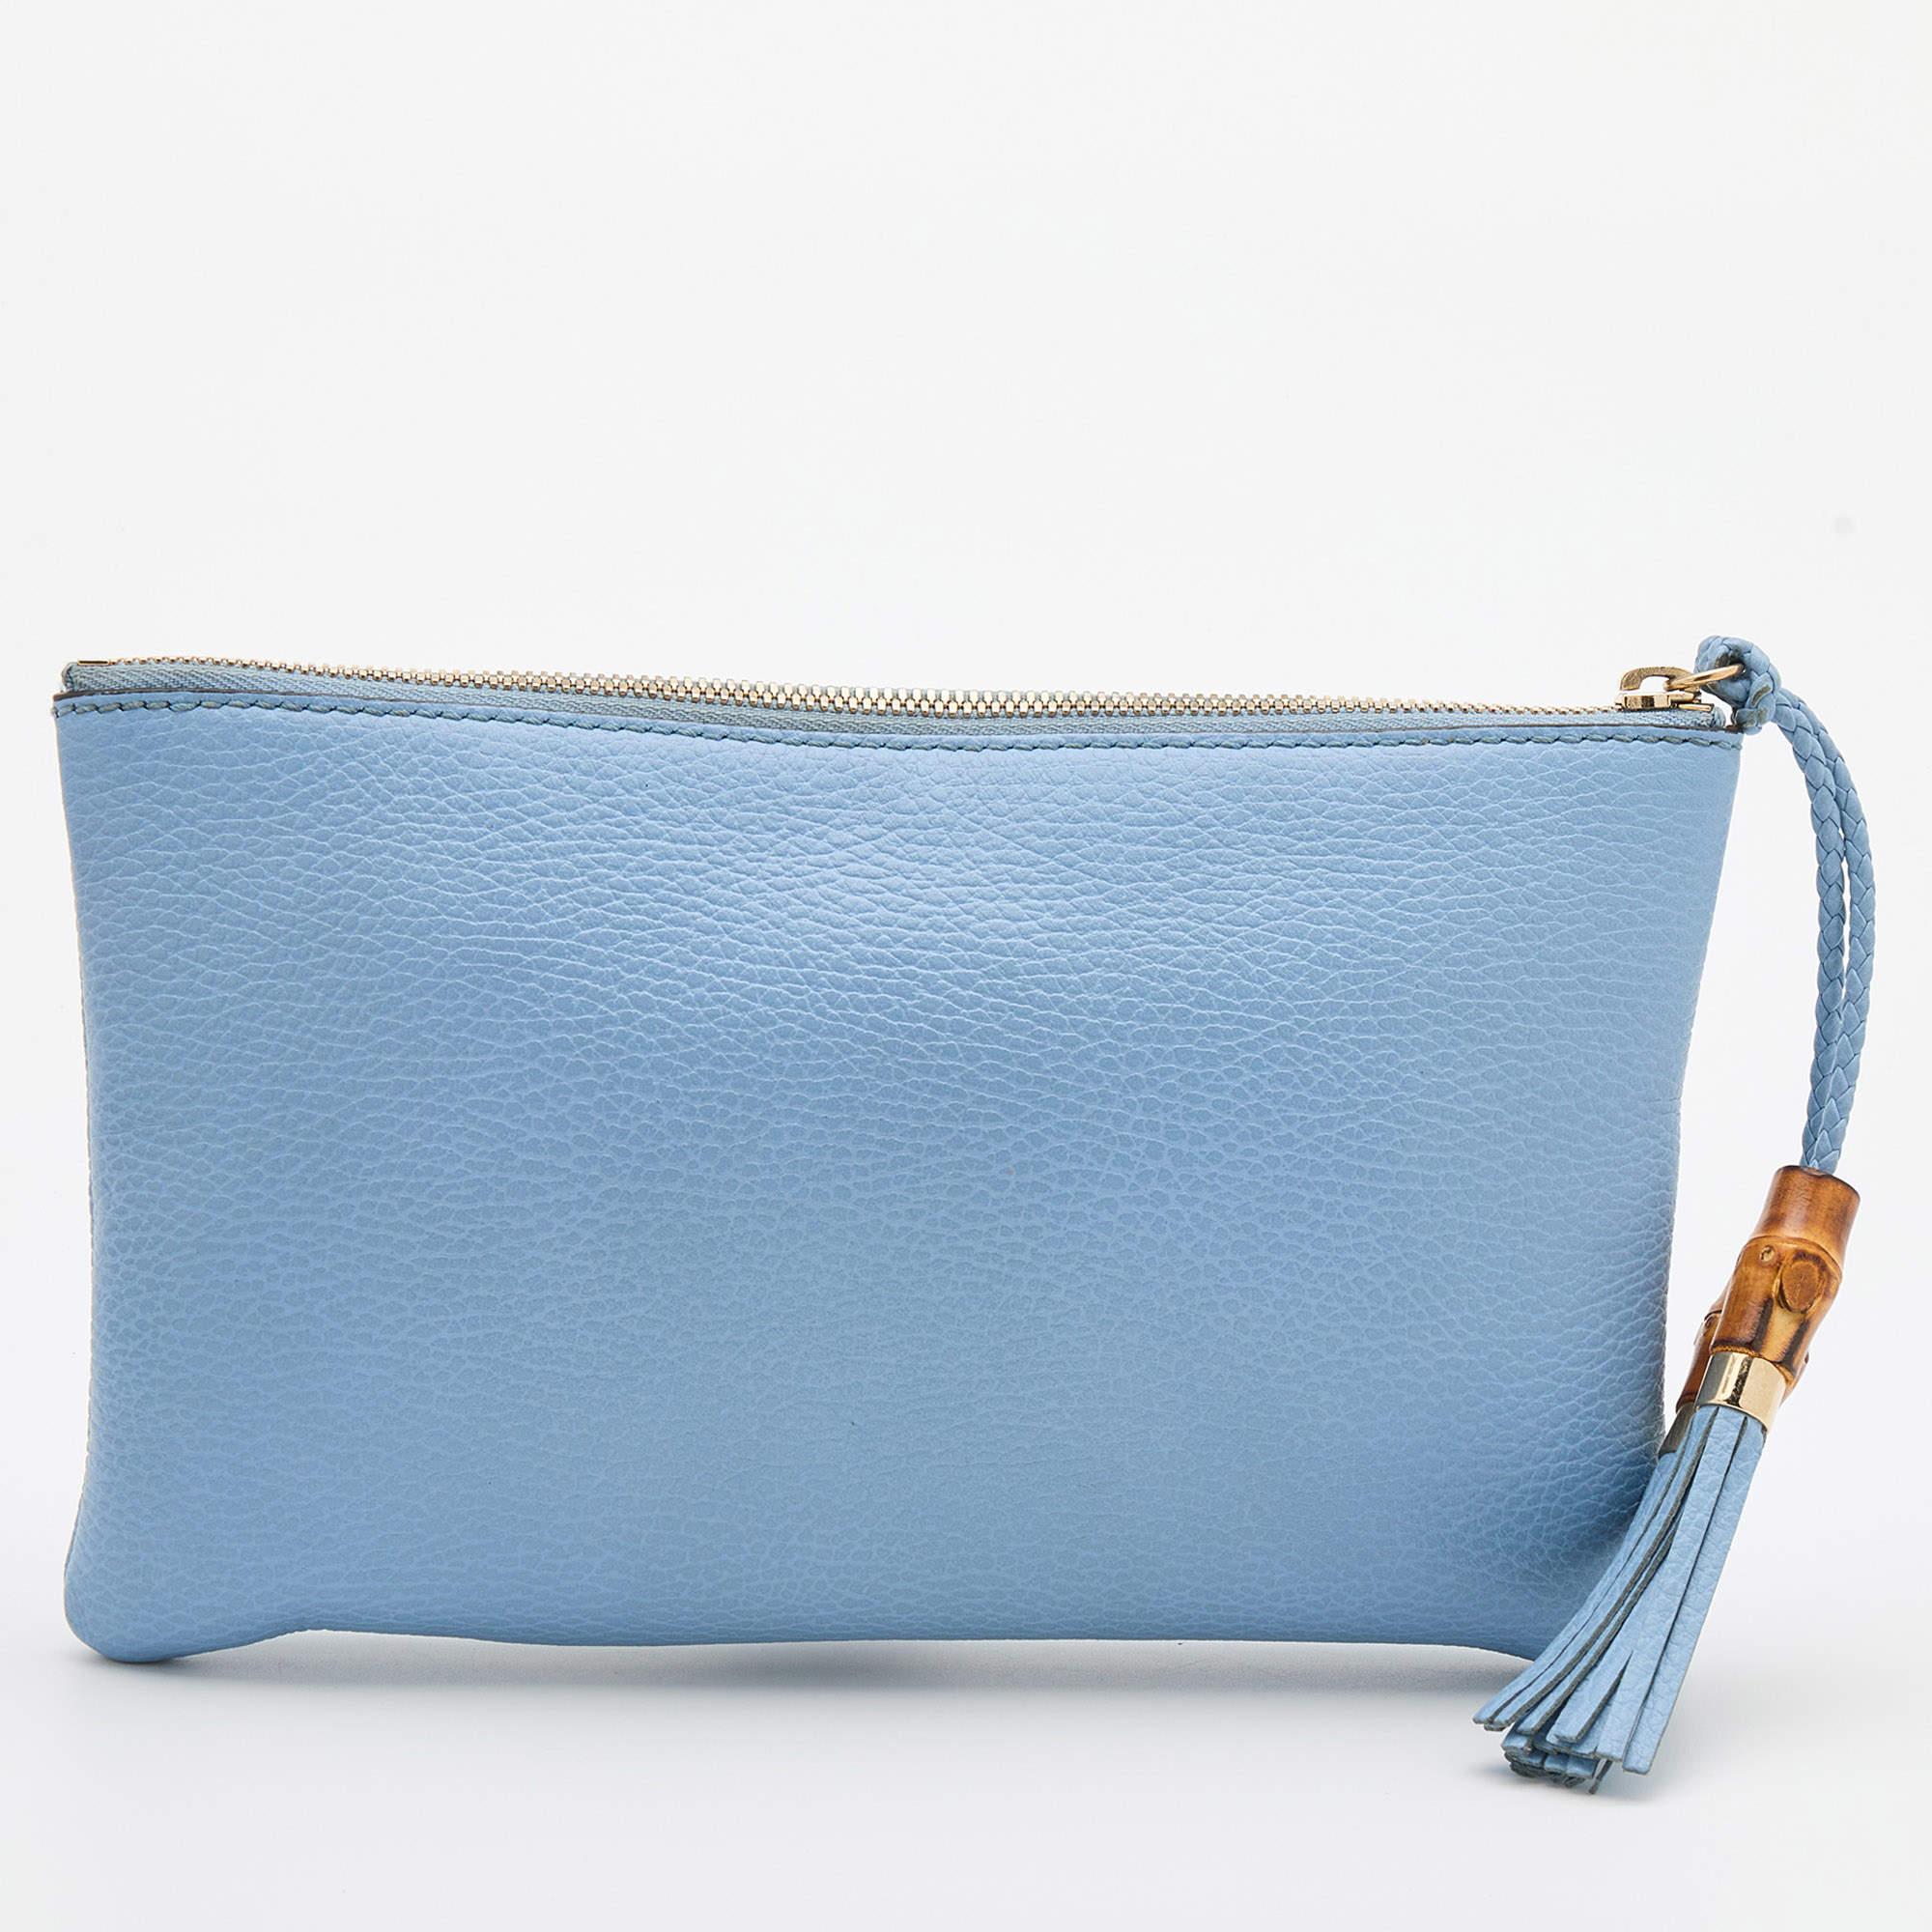 Carry around this stylish clutch and receive all the compliments. Featuring a chic hue on the exterior, this clutch is made from quality materials and opens to a roomy interior. It is the best accessory to pair with your party dresses.

Includes: